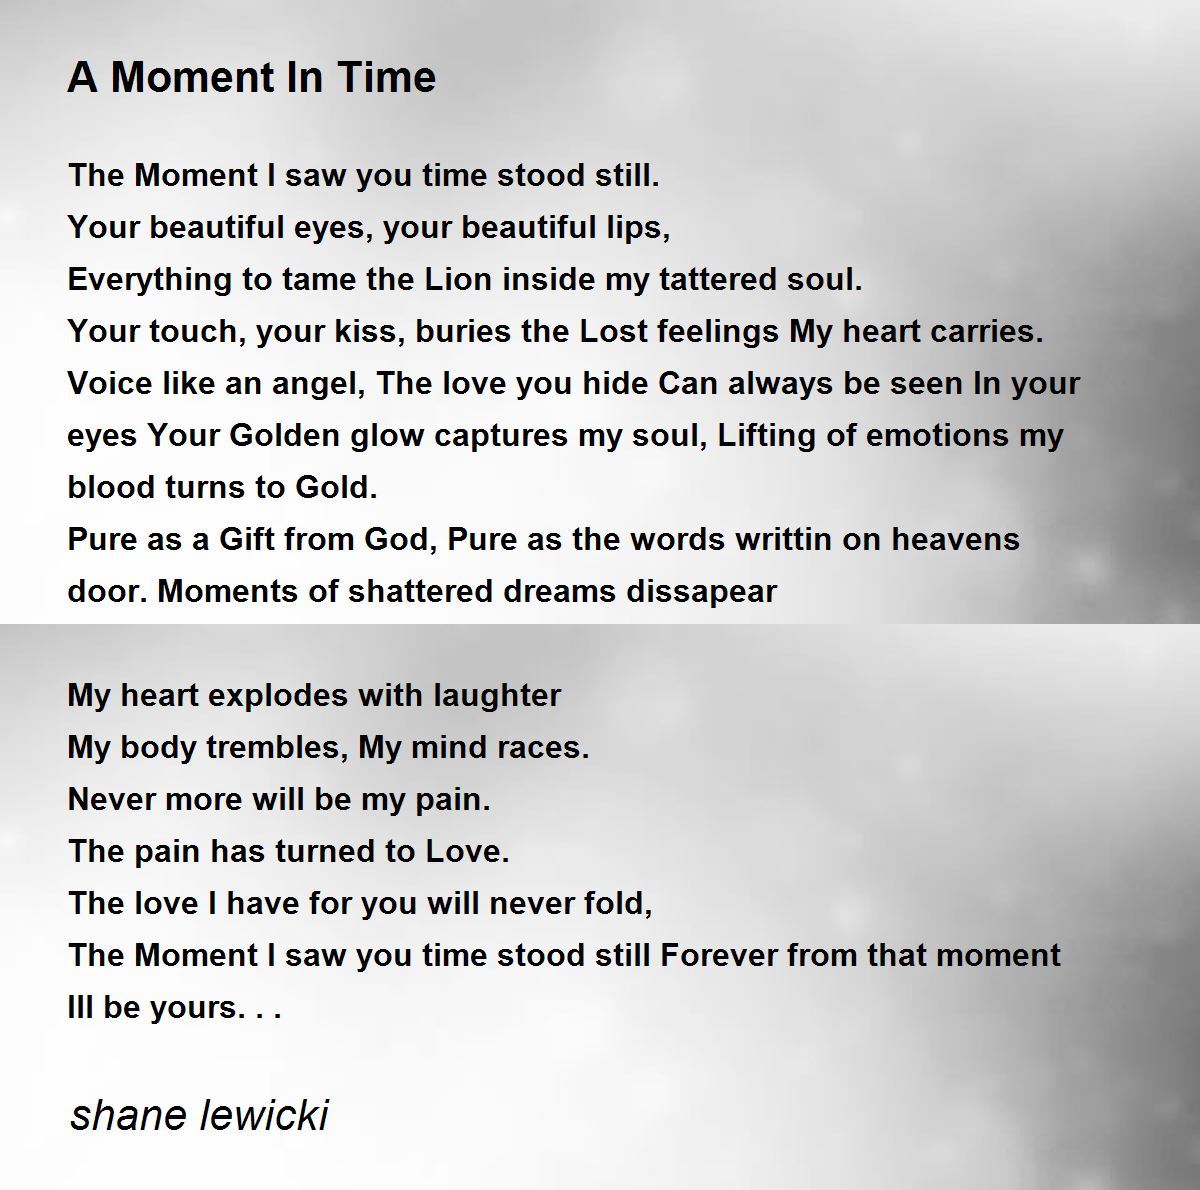 Moment In Time - A Moment In Time shane